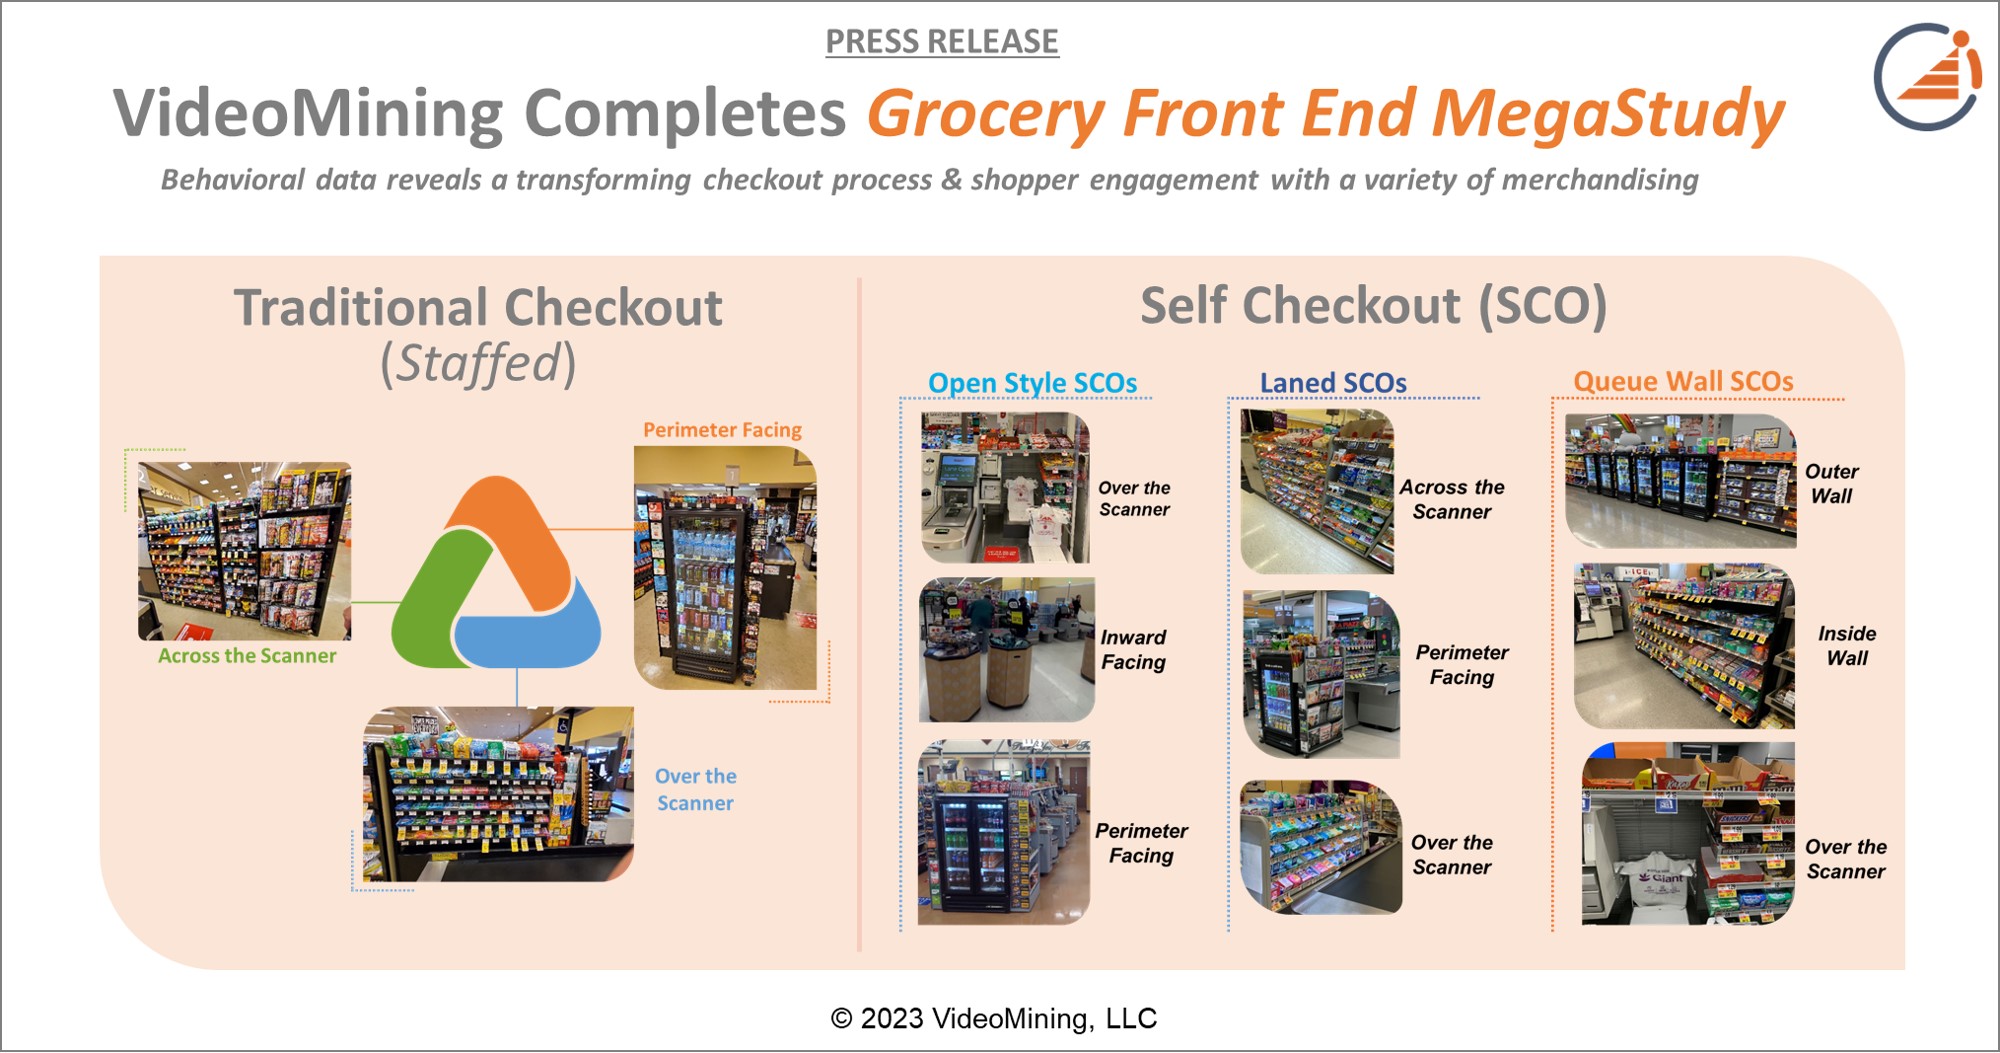 VideoMining Completes Grocery Front End MegaStudy